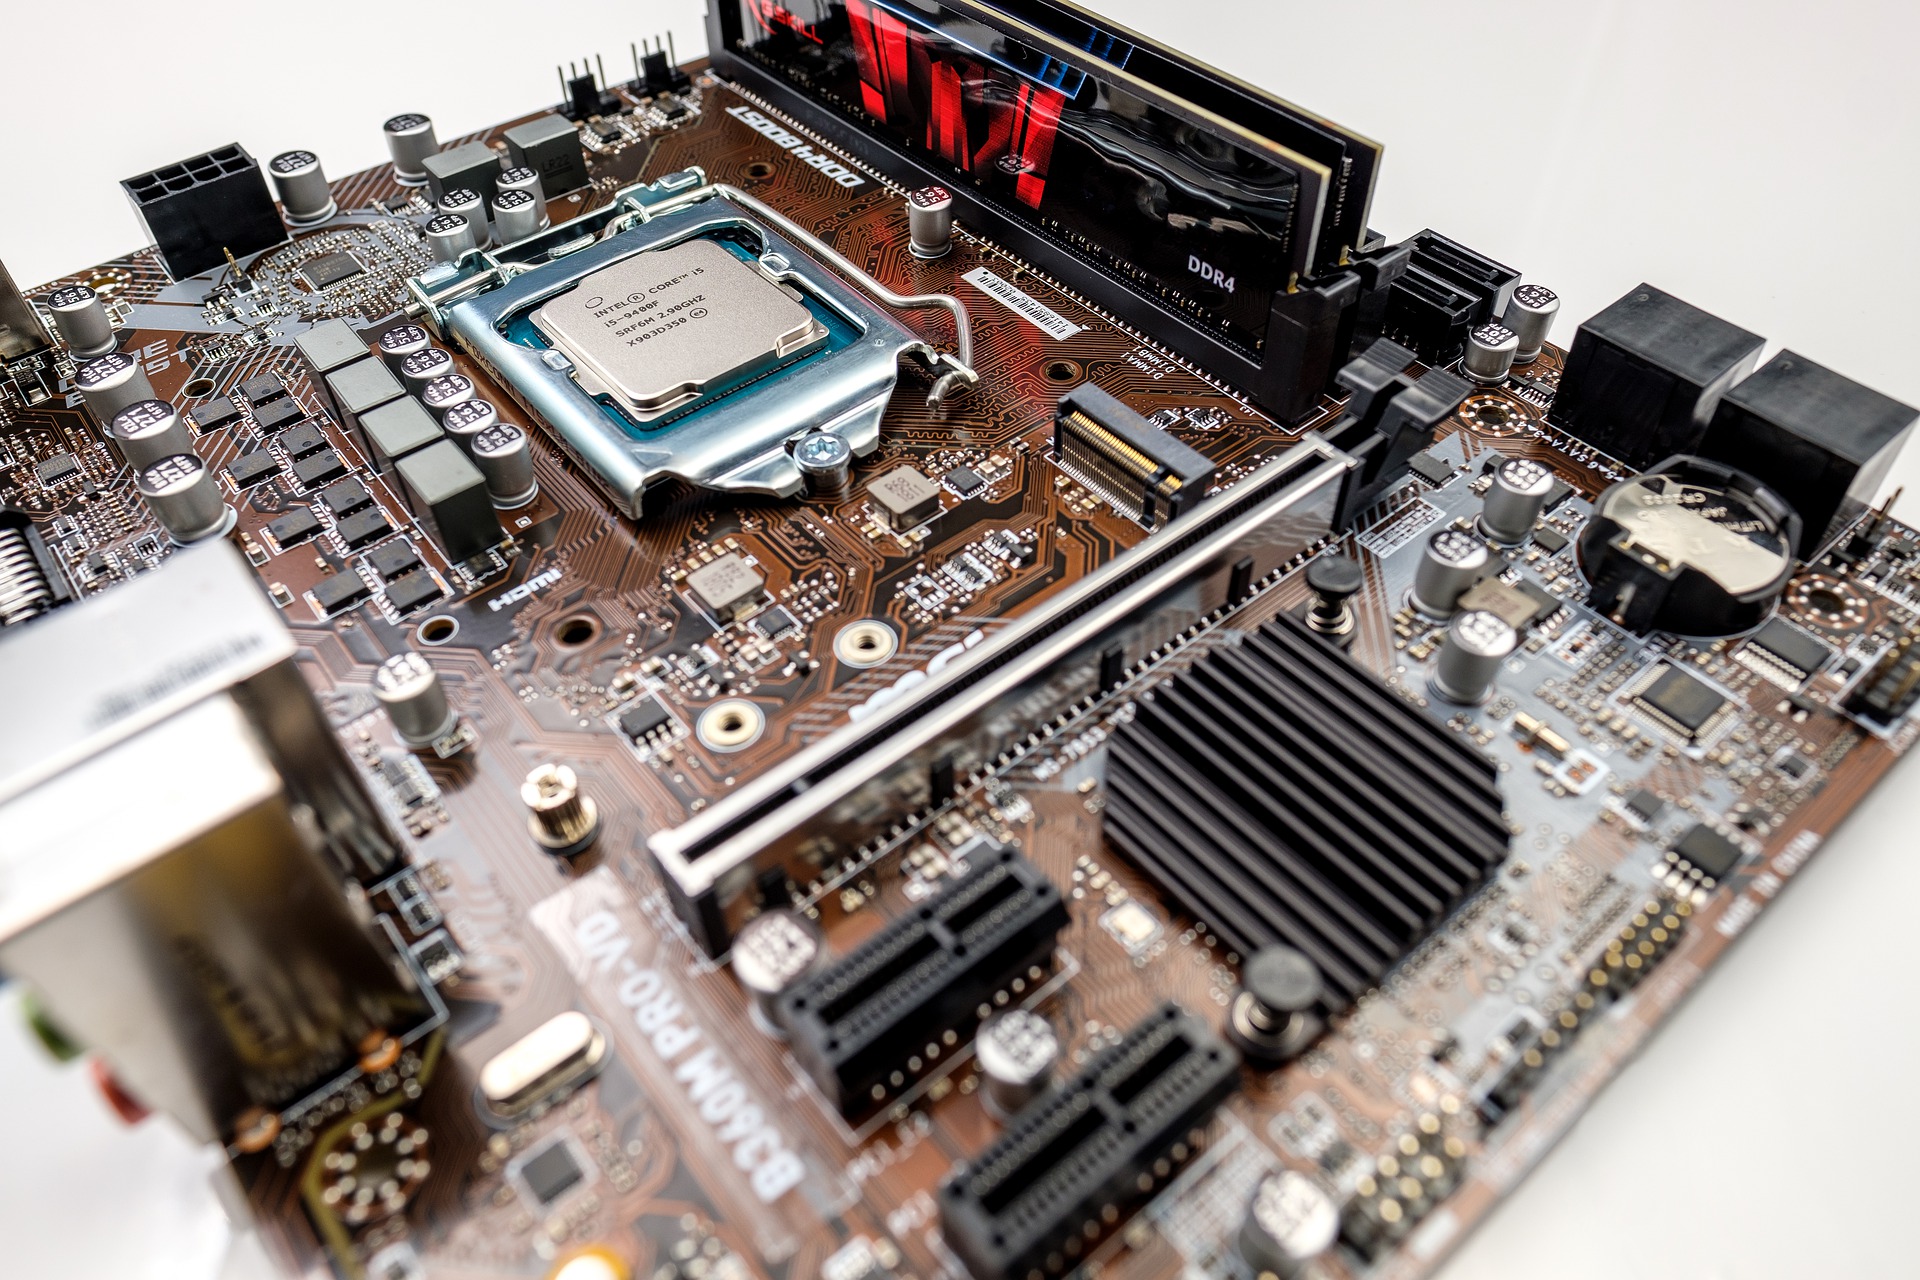 The computer motherboard